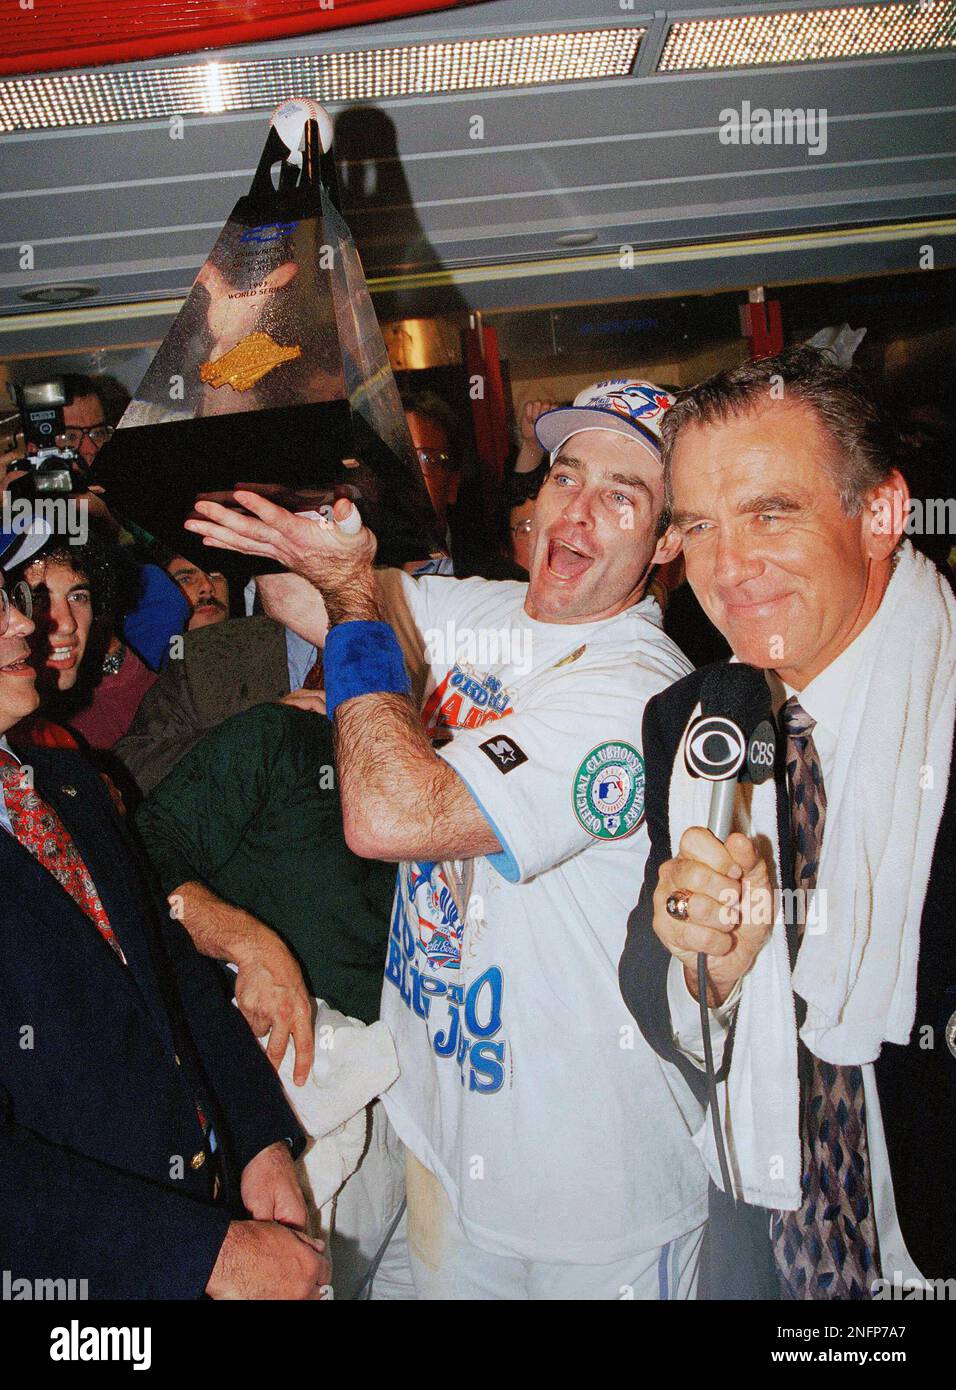 Toronto Blue Jays' Paul Molitor hoists the World Series MVP trophy in the  Jays' dressing room after their World Series victory on, Oct. 23, 1993 at  Sky Dome in Toronto. The Jays